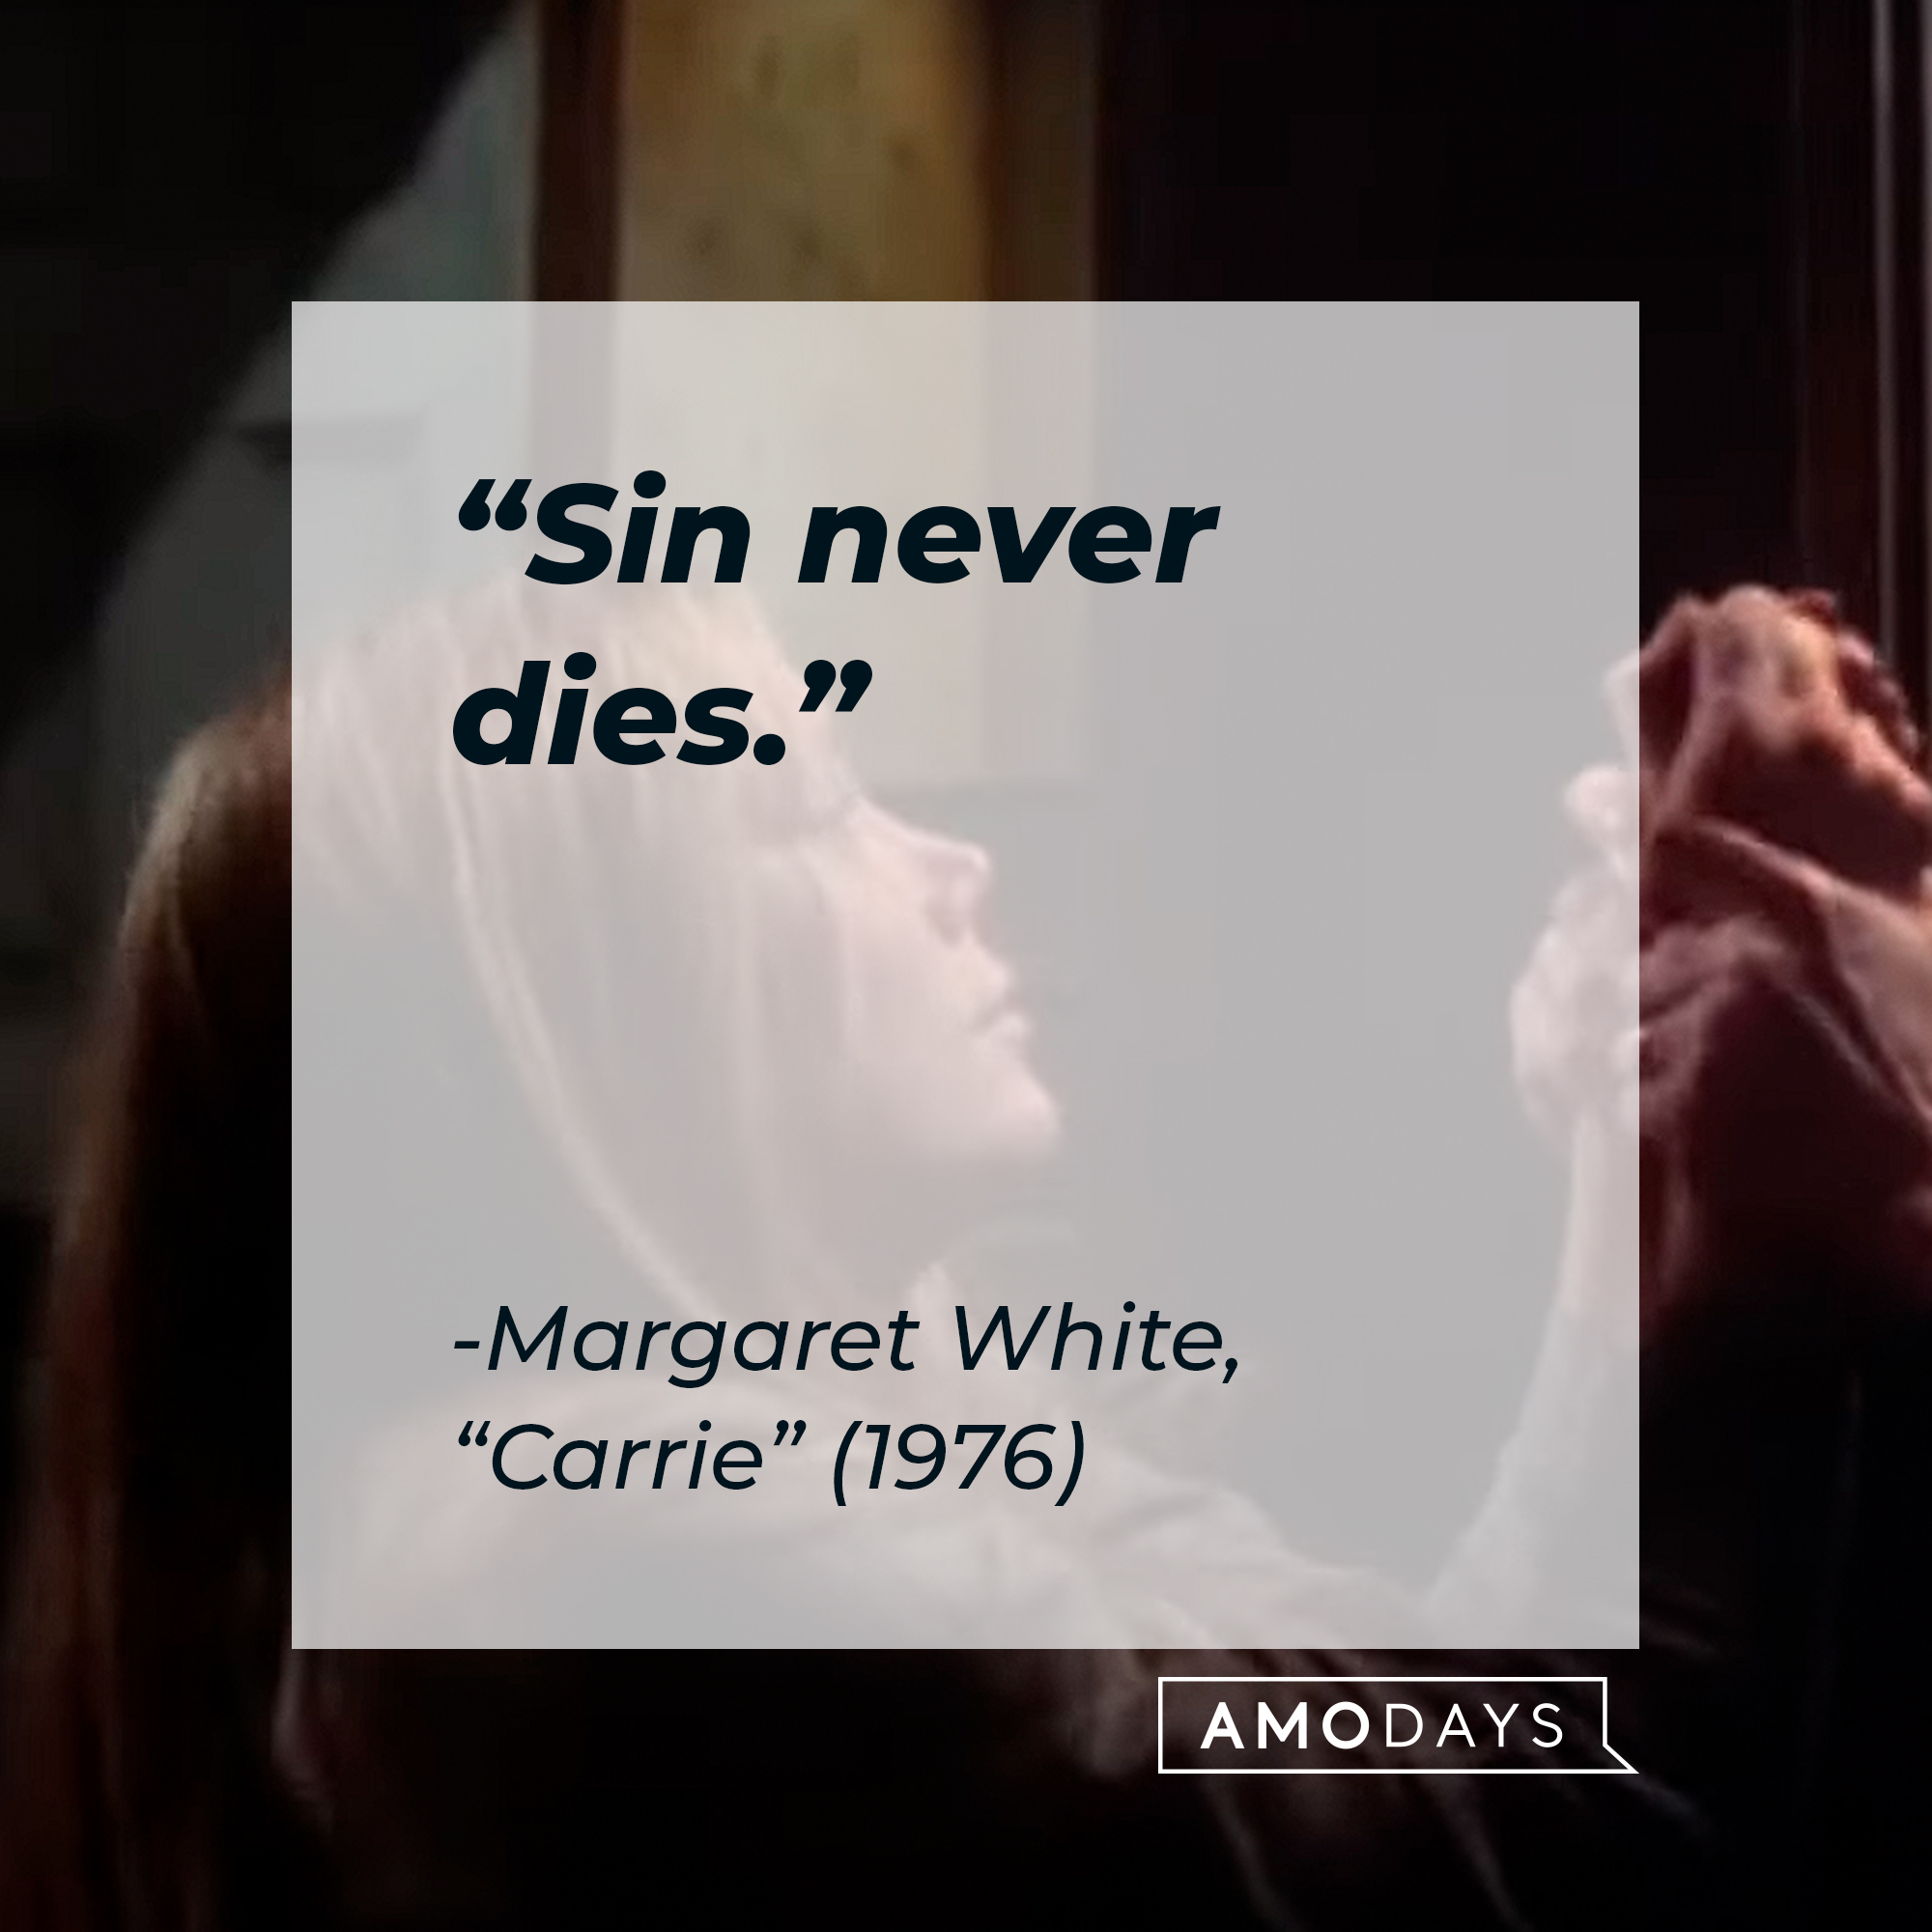 Margaret White's quote: "Sin never dies." | Source: youtube.com/MGMStudios